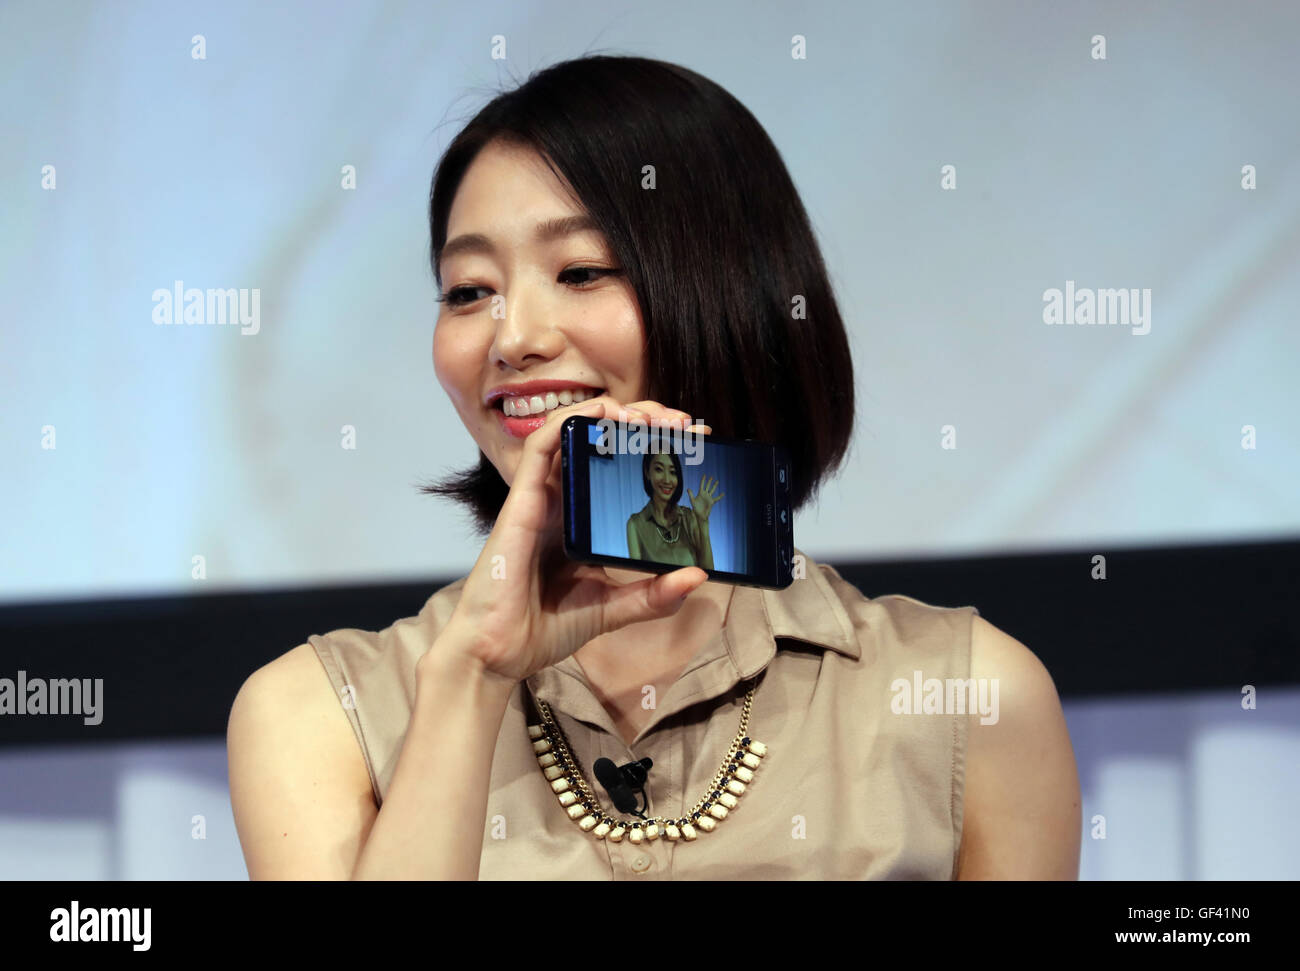 Tokyo, Japan. 28th July, 2016. Japanese actress Kaori Manabe (R) displays a picture of a smart phone for senior people "Basio2", taken by actor Ryotaro Sugi in Tokyo on Thursday, July 28, 2016. The 71-year-old veteran drama actor used the smart phone for the first time. © Yoshio Tsunoda/AFLO/Alamy Live News Stock Photo